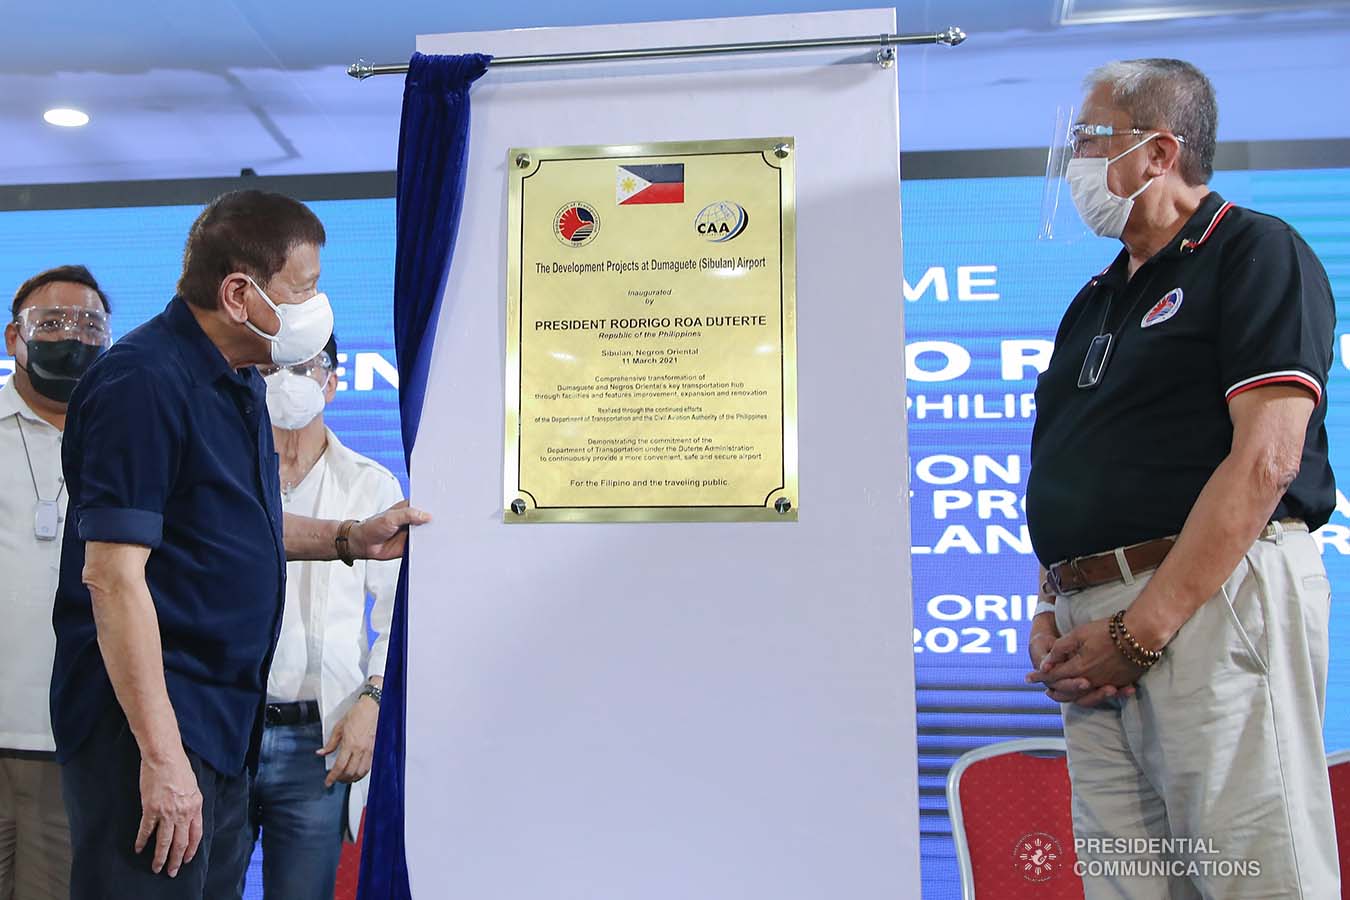 President Rodrigo Roa Duterte, assisted by Transportation Secretary Arthur Tugade, looks at the marker as he leads the unveiling ceremony of the development projects at Dumaguete (Sibulan) Airport in Sibulan, Negros Oriental on March 11, 2021. VALERIE ESCALERA/ PRESIDENTIAL PHOTO